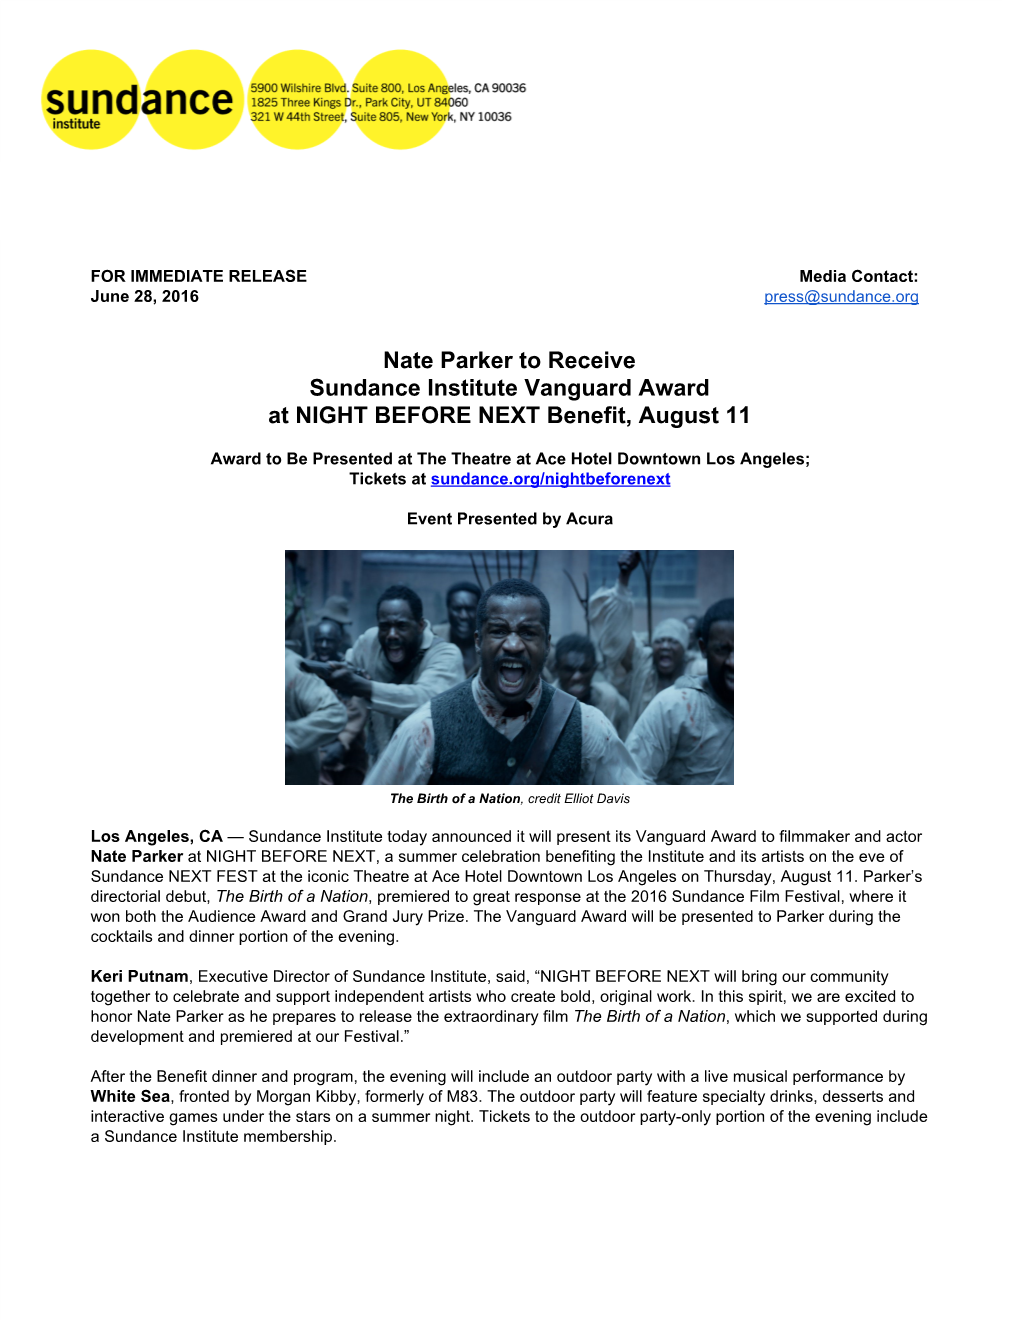 Nate Parker to Receive Sundance Institute Vanguard Award at NIGHT BEFORE NEXT Benefit, August 11